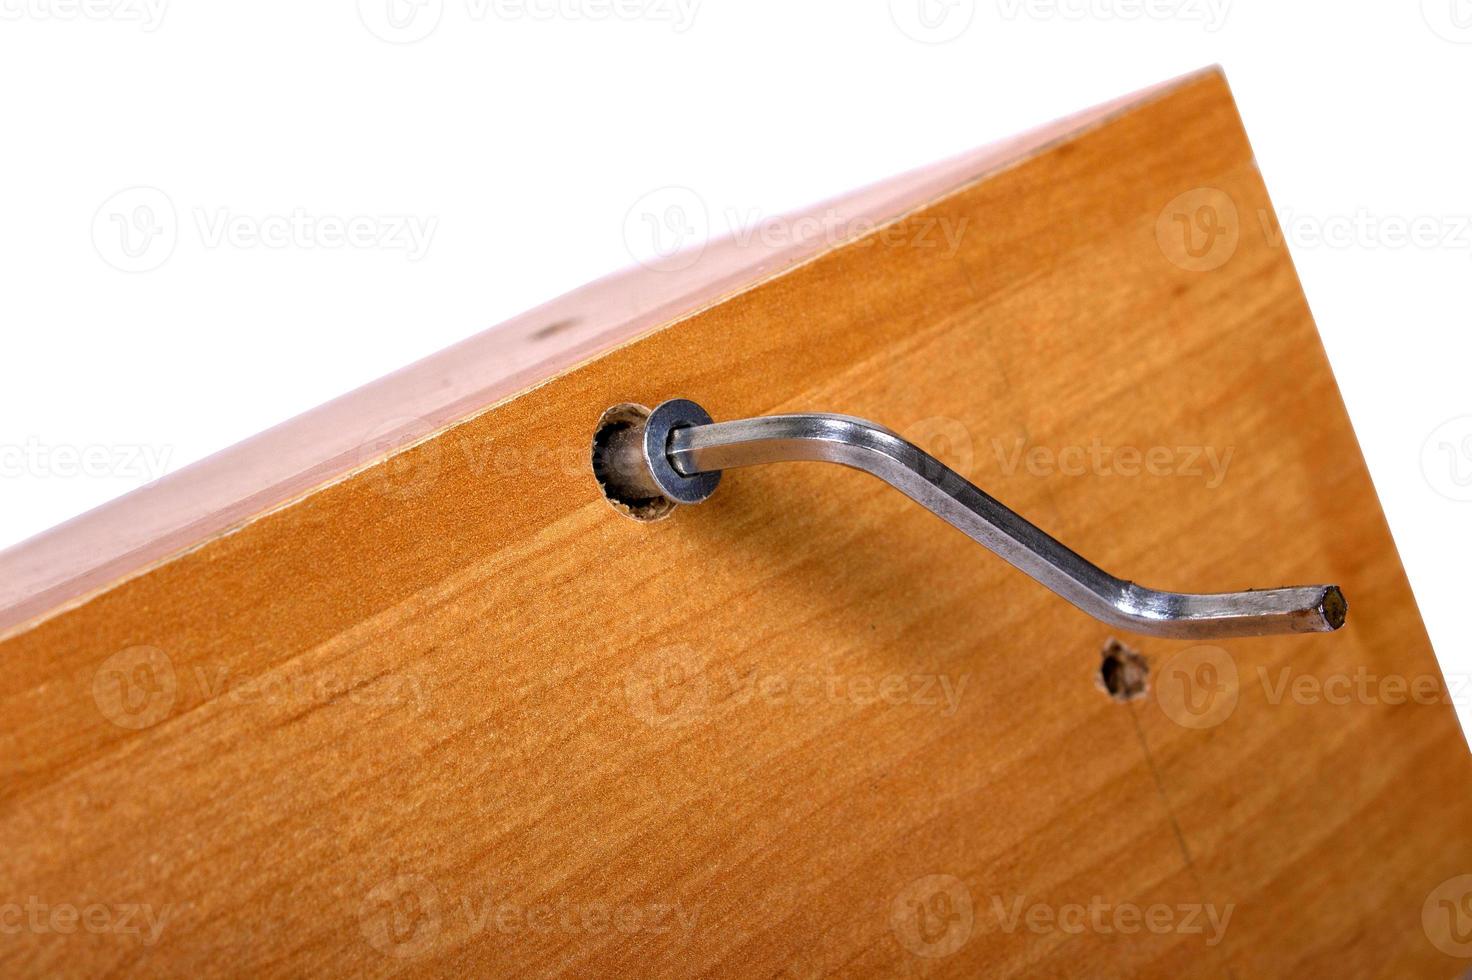 Hand of the worker screws in a wooden block photo